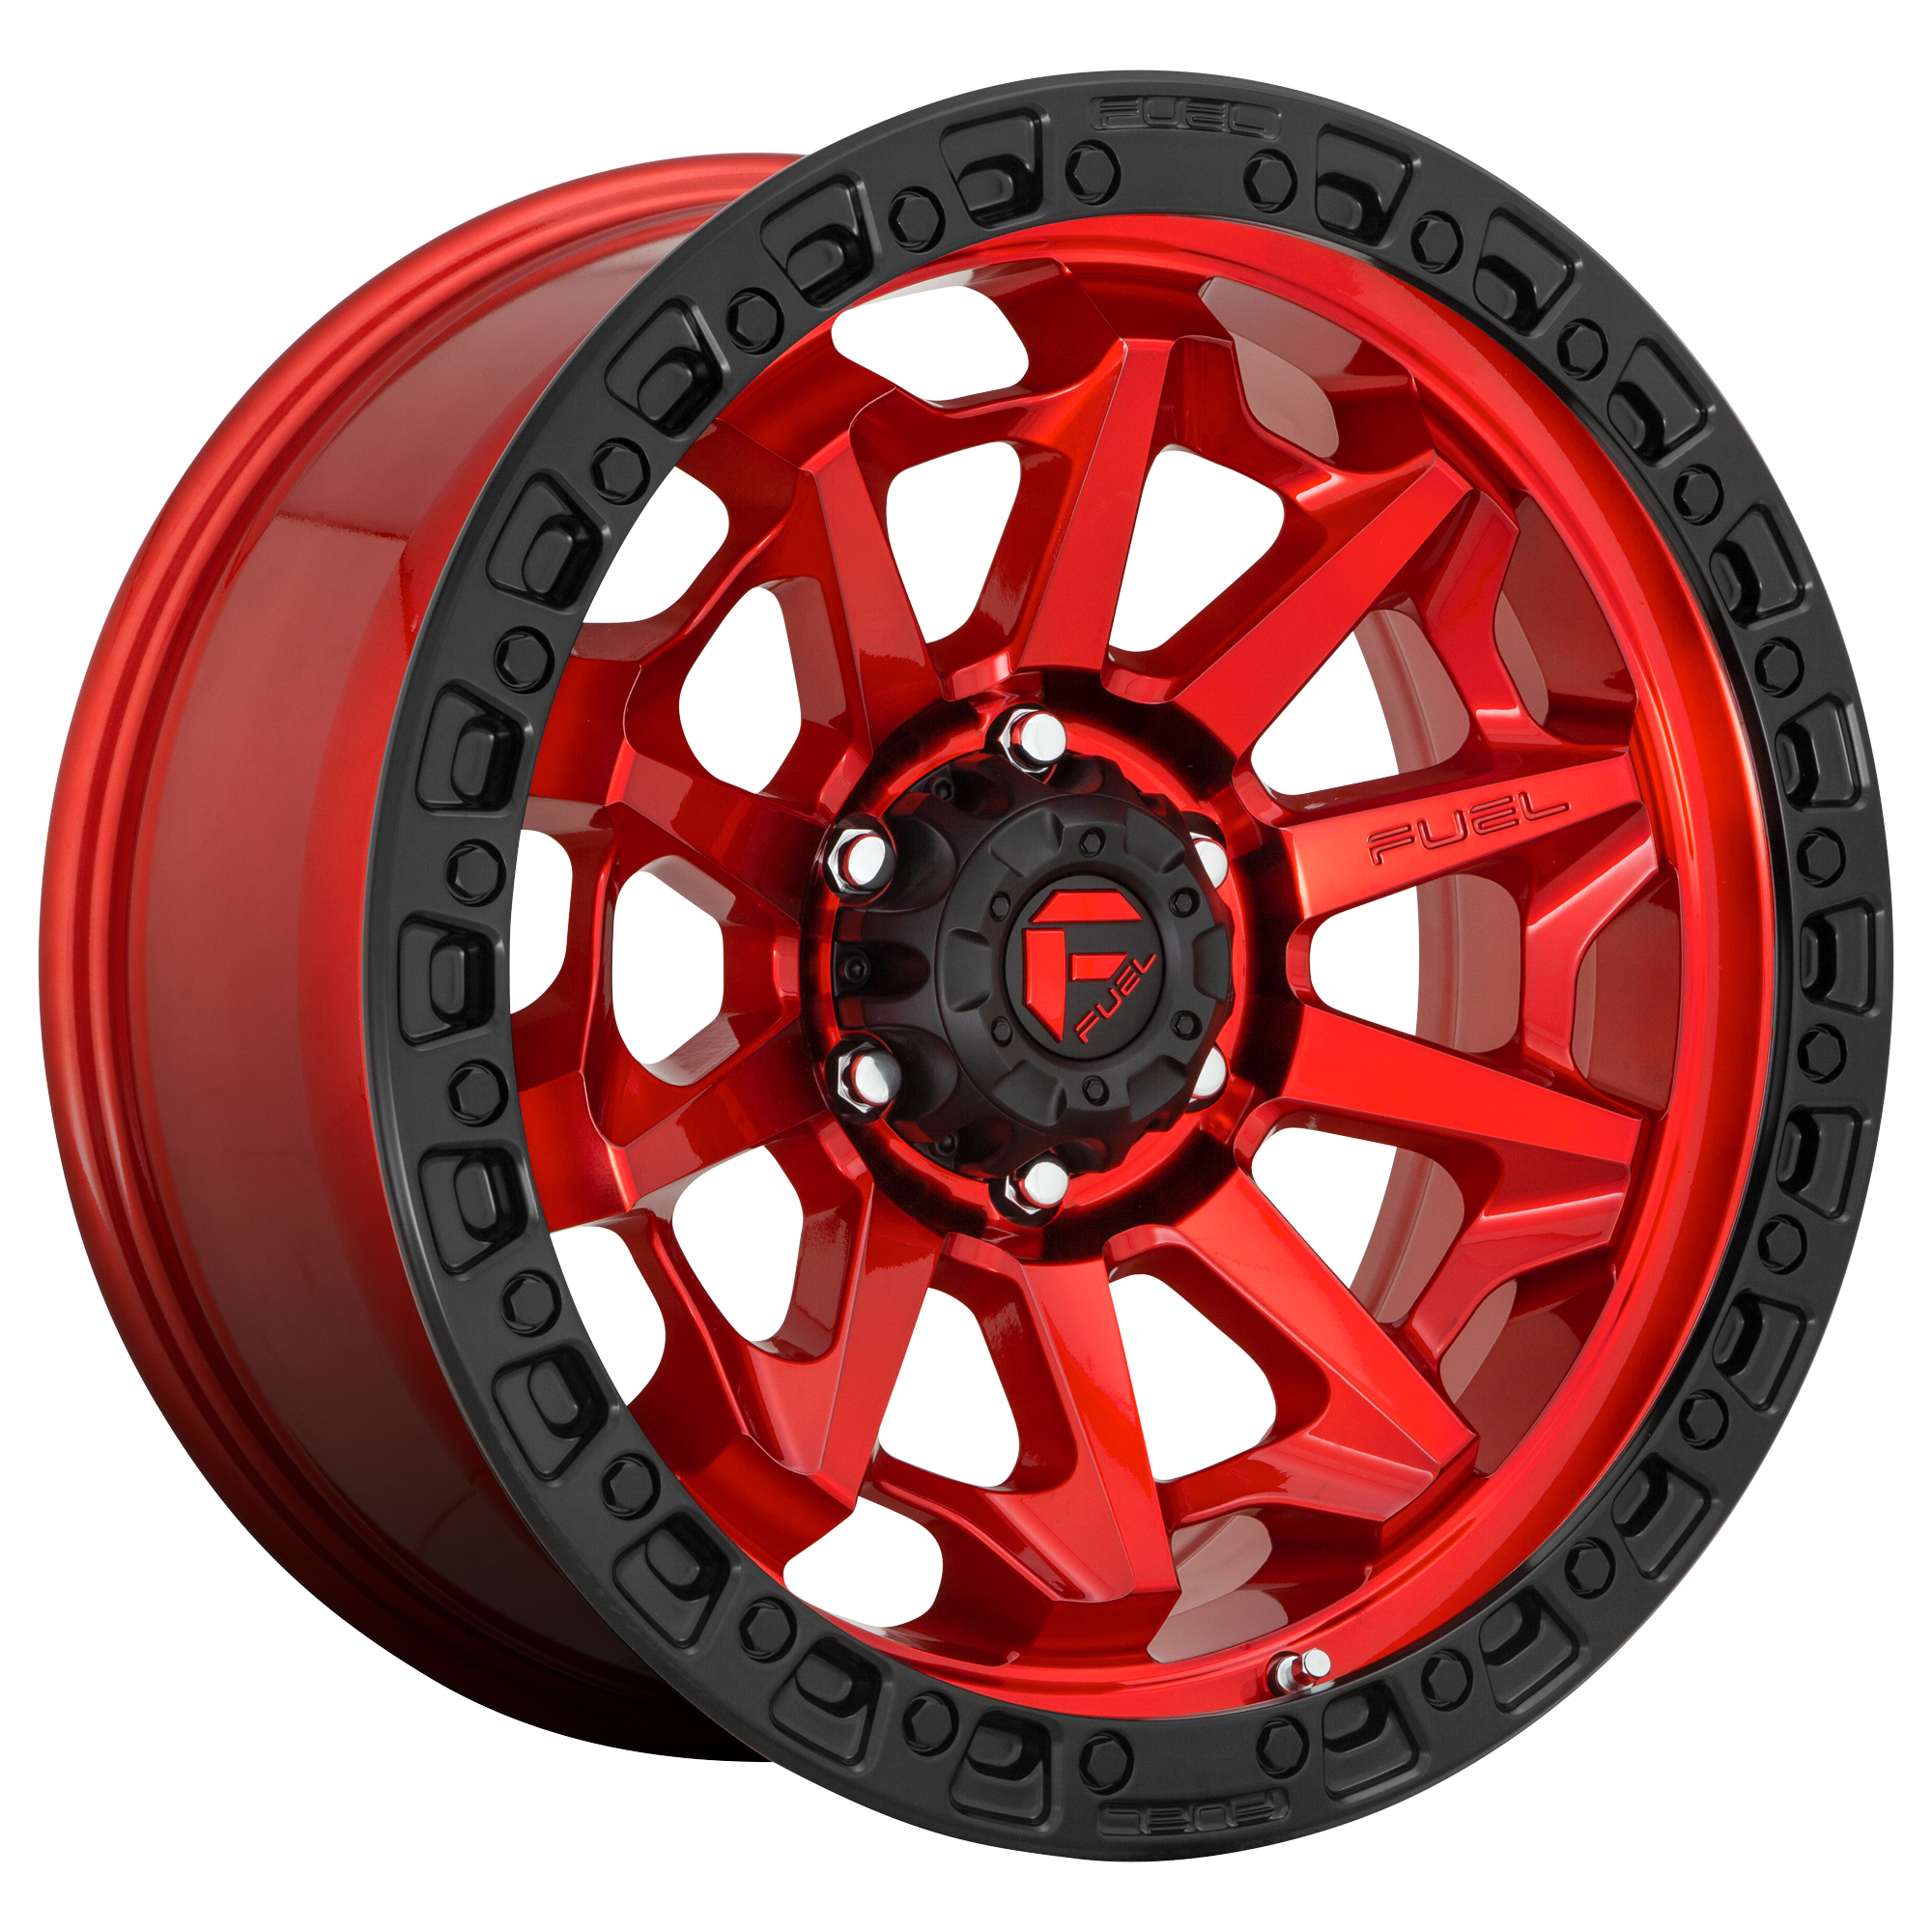 COVERT 18x9 5x127.00 CANDY RED BLACK BEAD RING (-12 mm) - Tires and Engine Performance